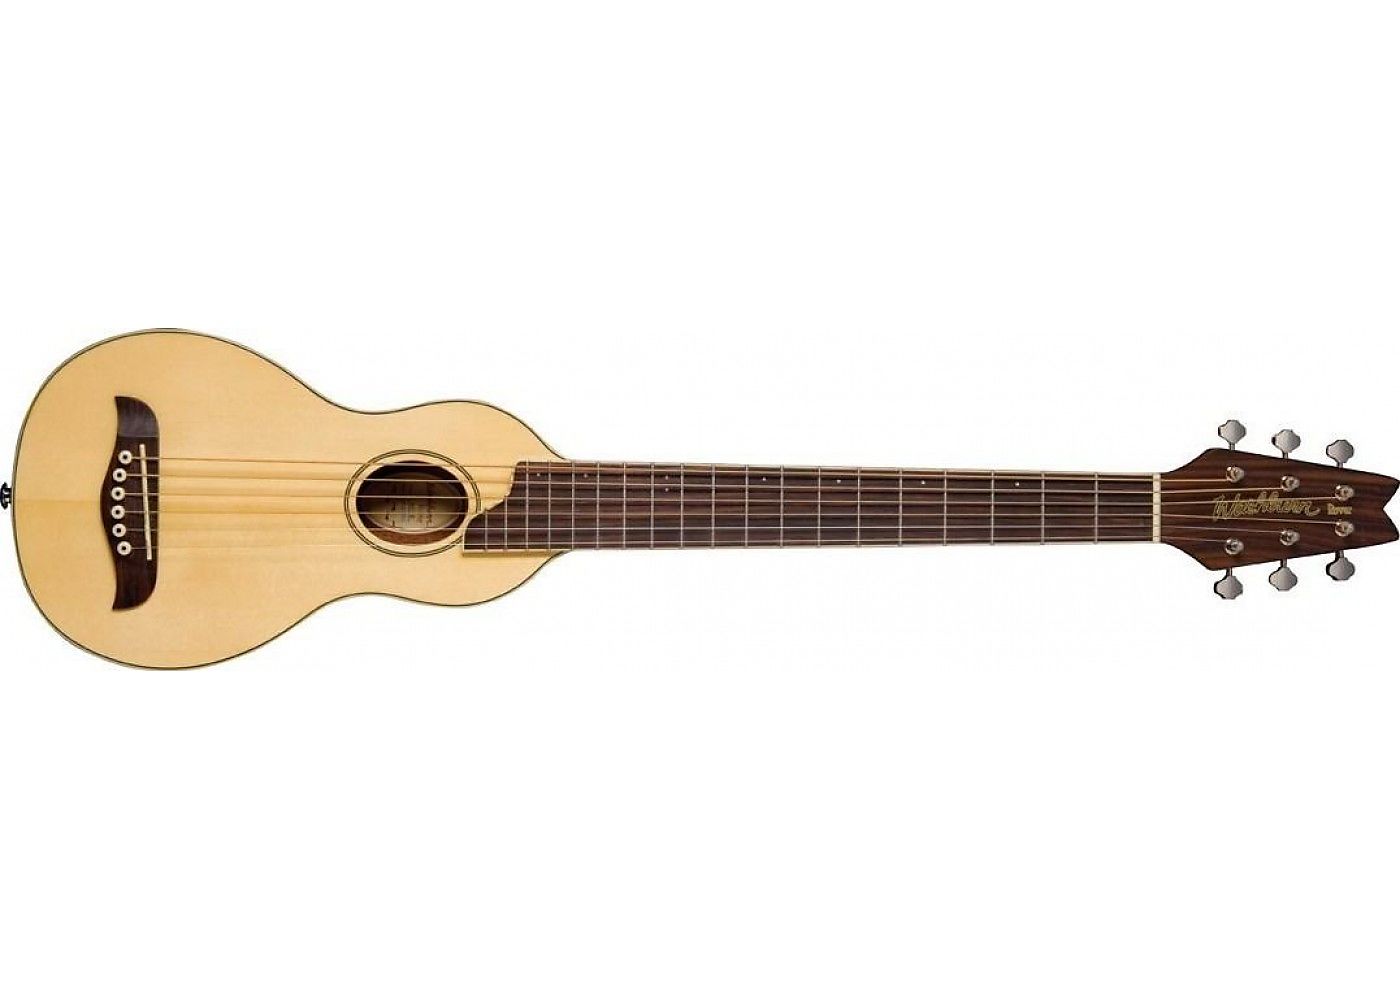 Washburn RO10 Rover Steel String Travel Acoustic Guitar Natural | Reverb